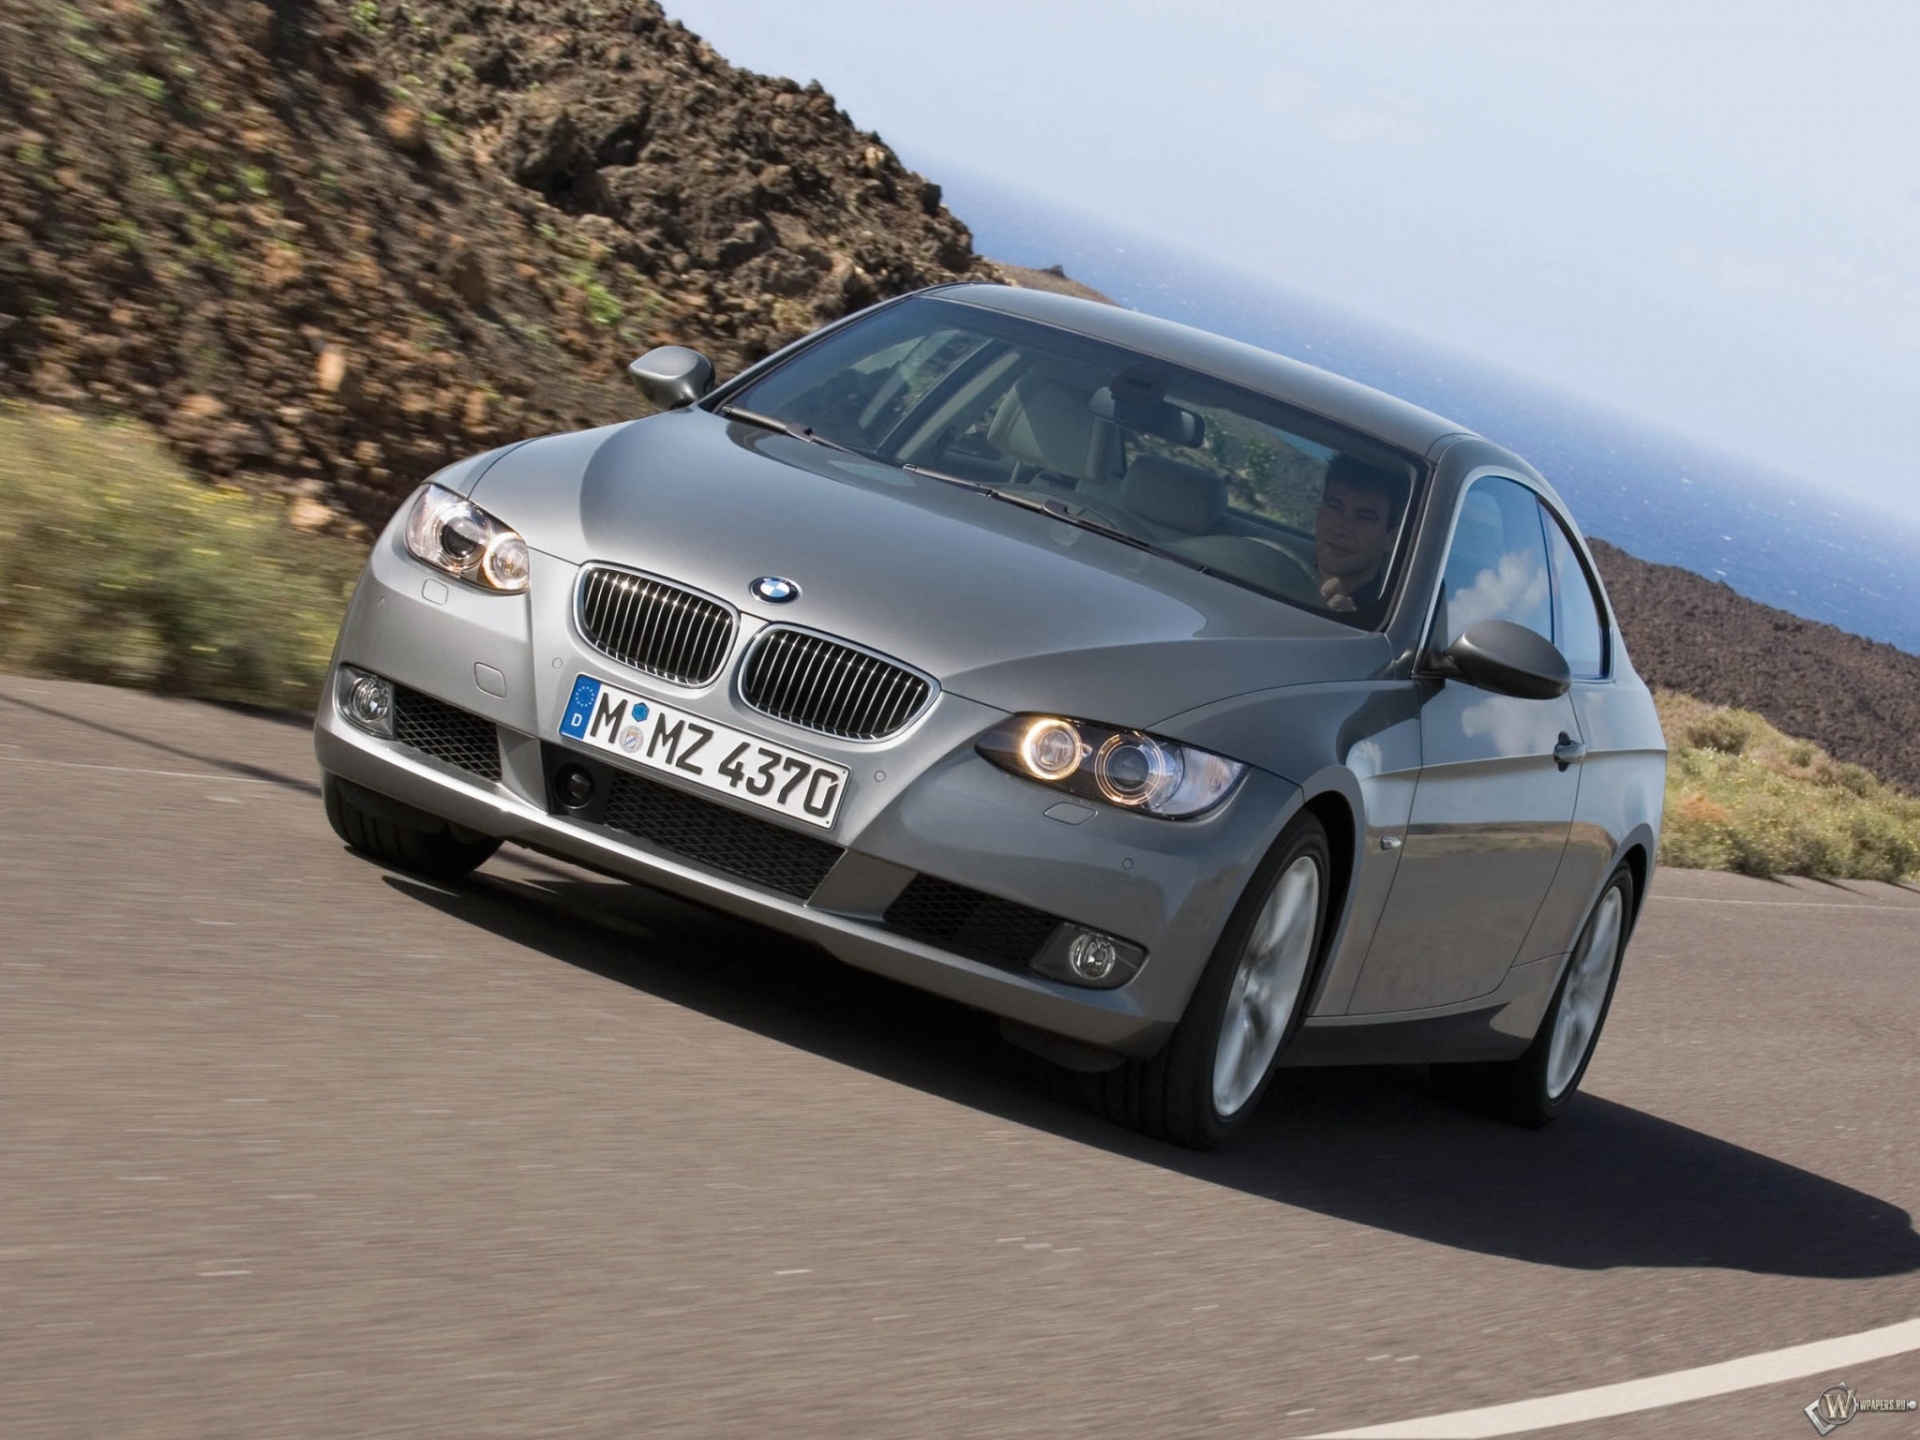 BMW - 3 Series Coupe (2007) 1920x1440